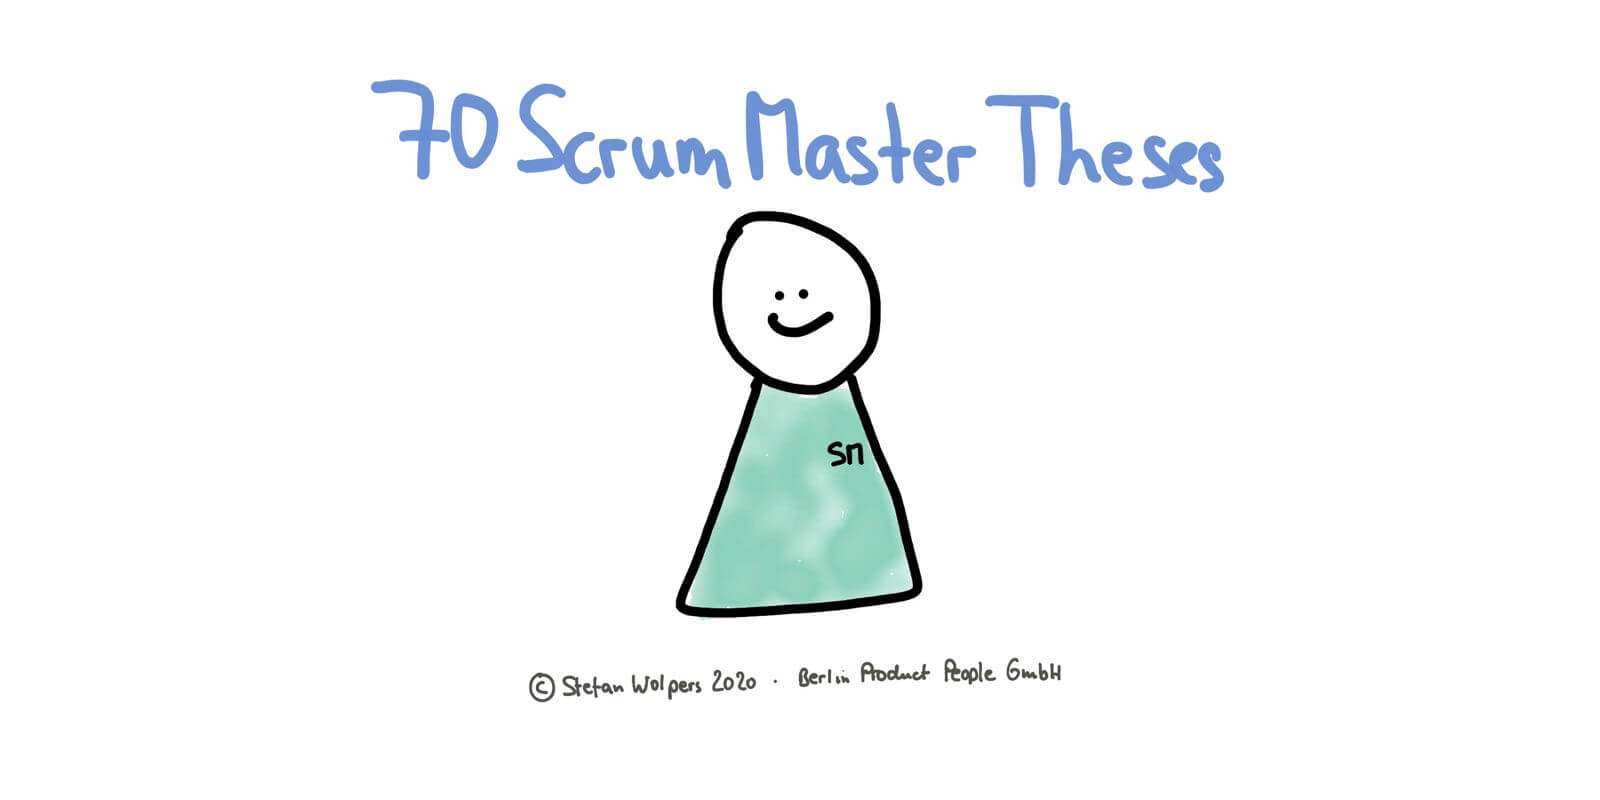 70 Scrum Master Theses — Age-of-Product.com